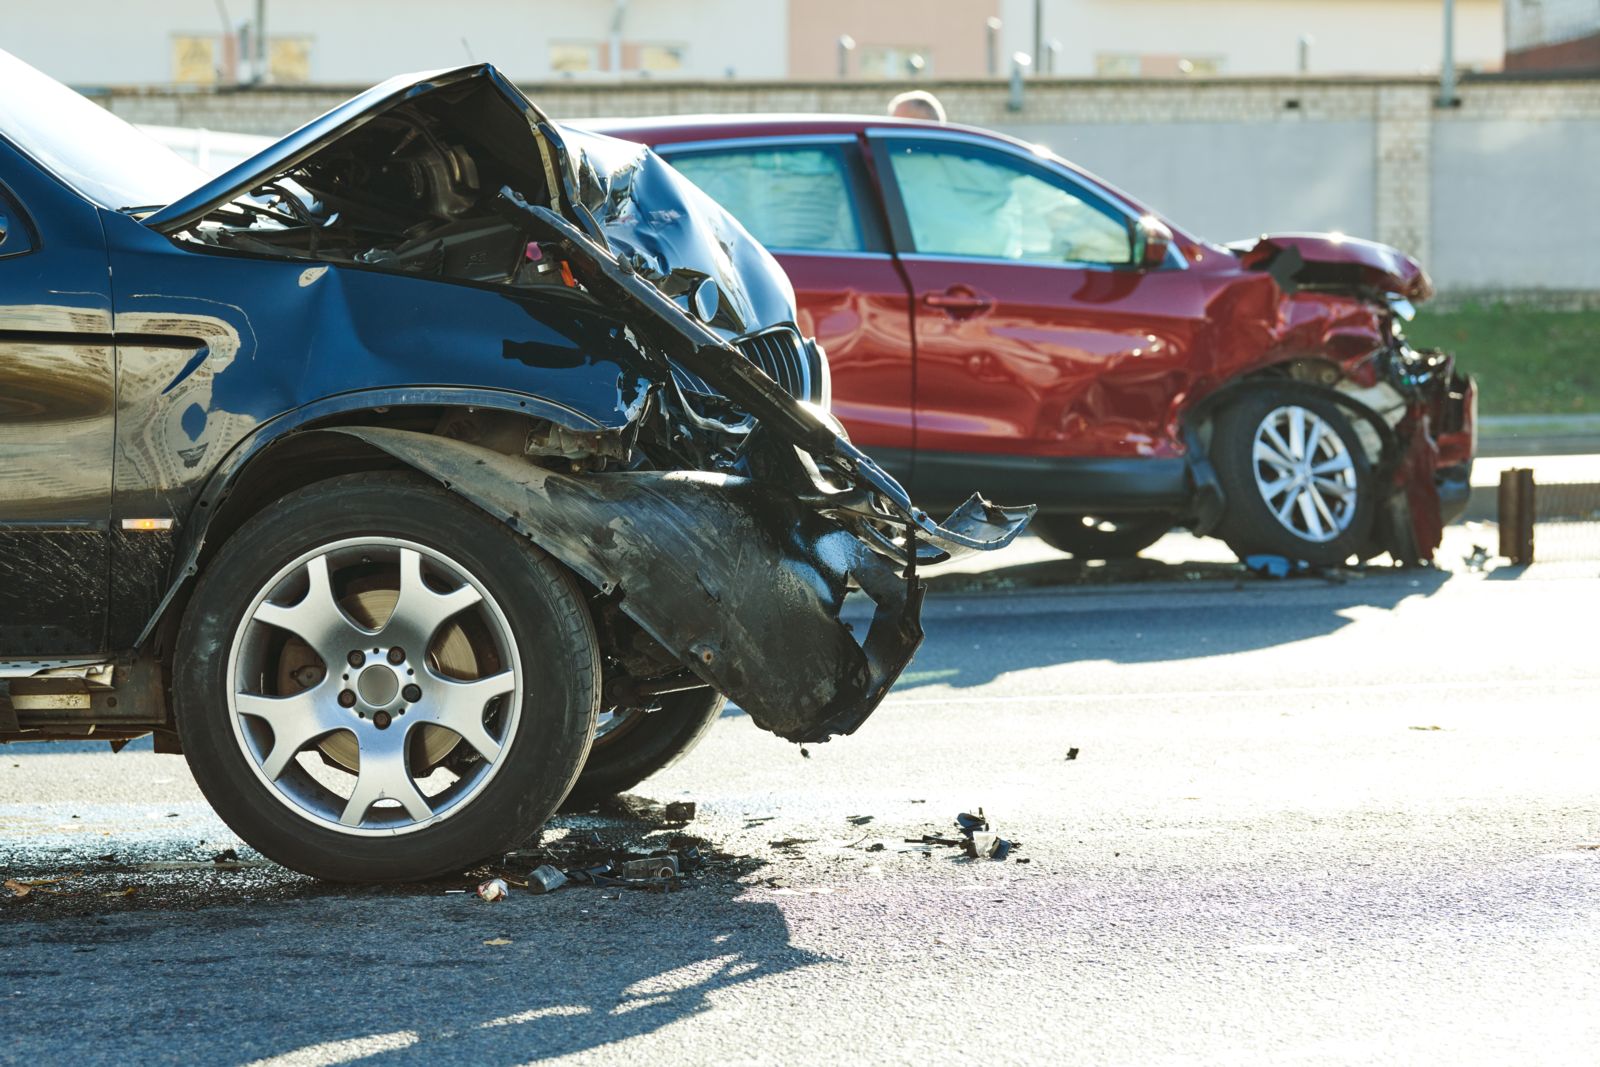 How an Ontario Injury Lawyer Can Help Car Accident Victims Pursue the Compensation they Deserve